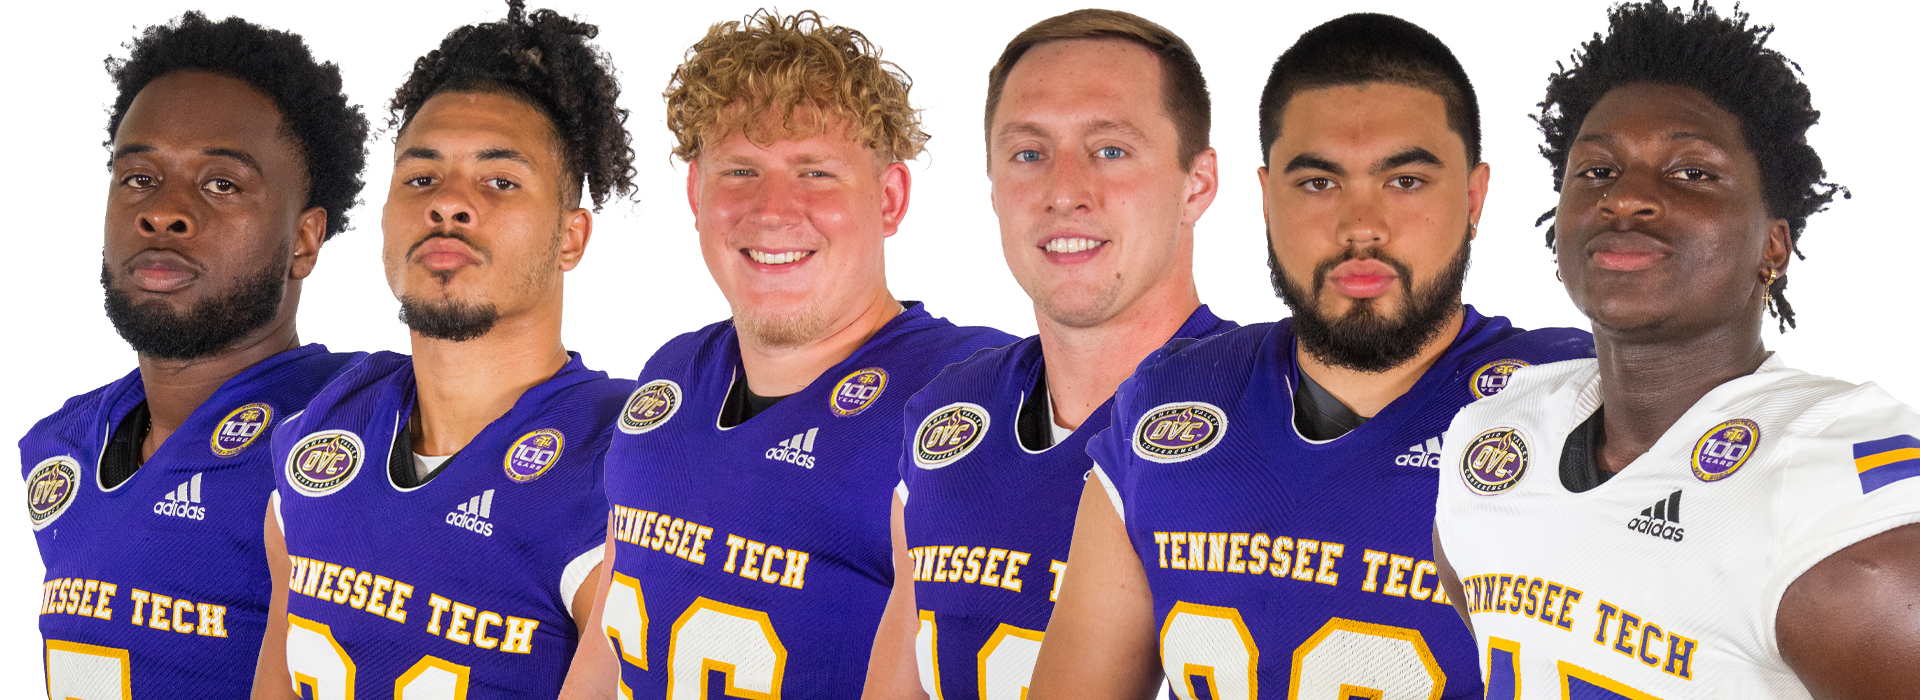 Reliford on All-OVC first-team defense leads six picks on postseason squads